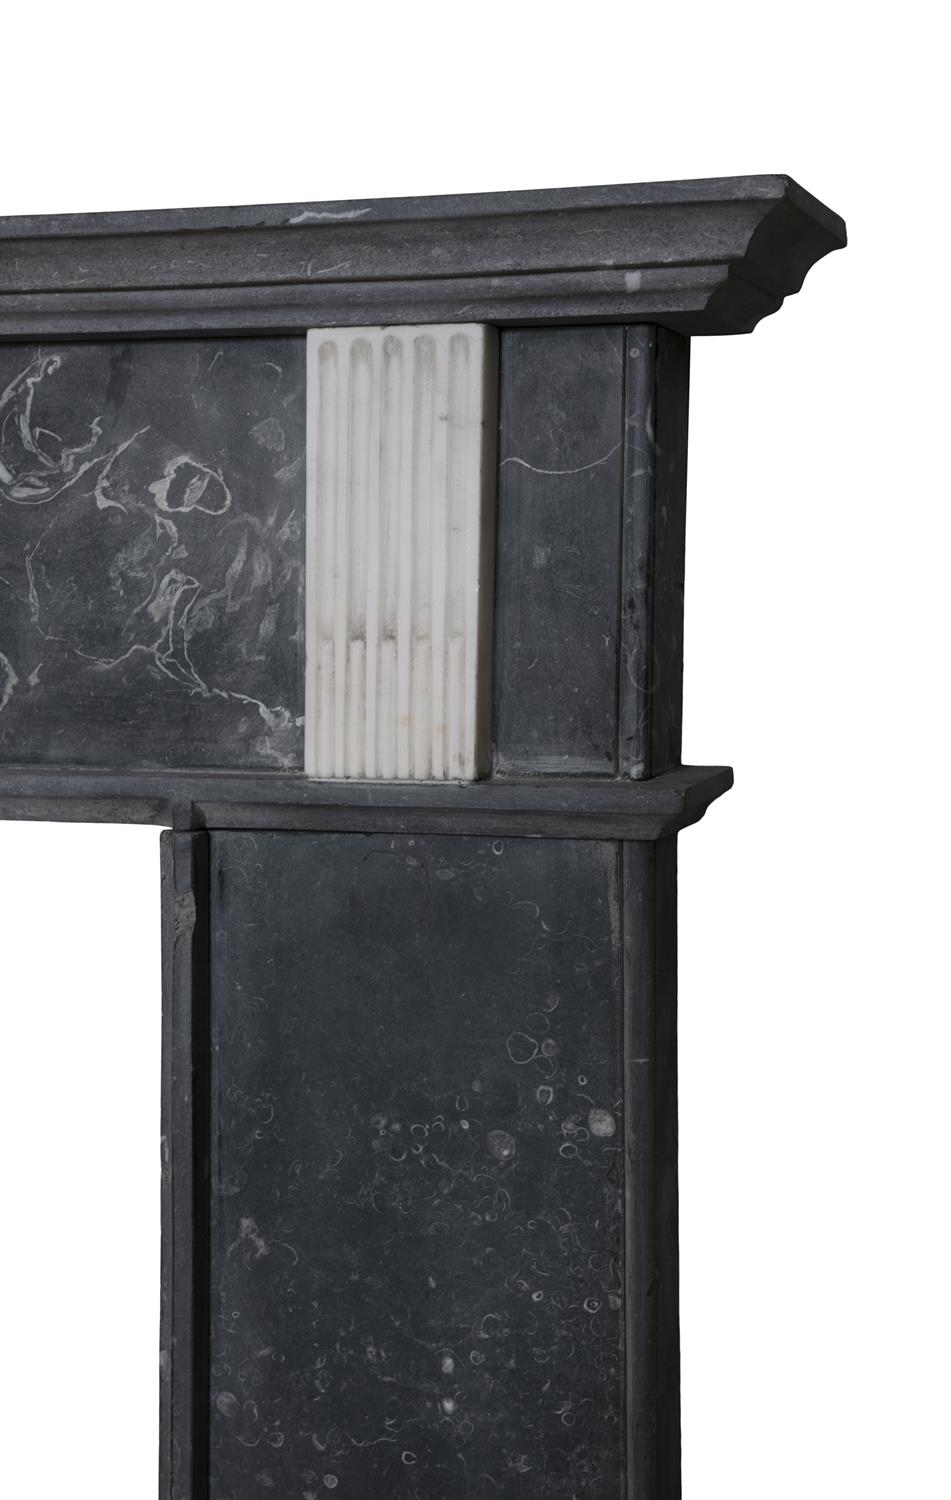 A KILKENNY BLACK MARBLE FIREPLACE C. 1800 with frieze pediment on plain column supports. - Image 2 of 13